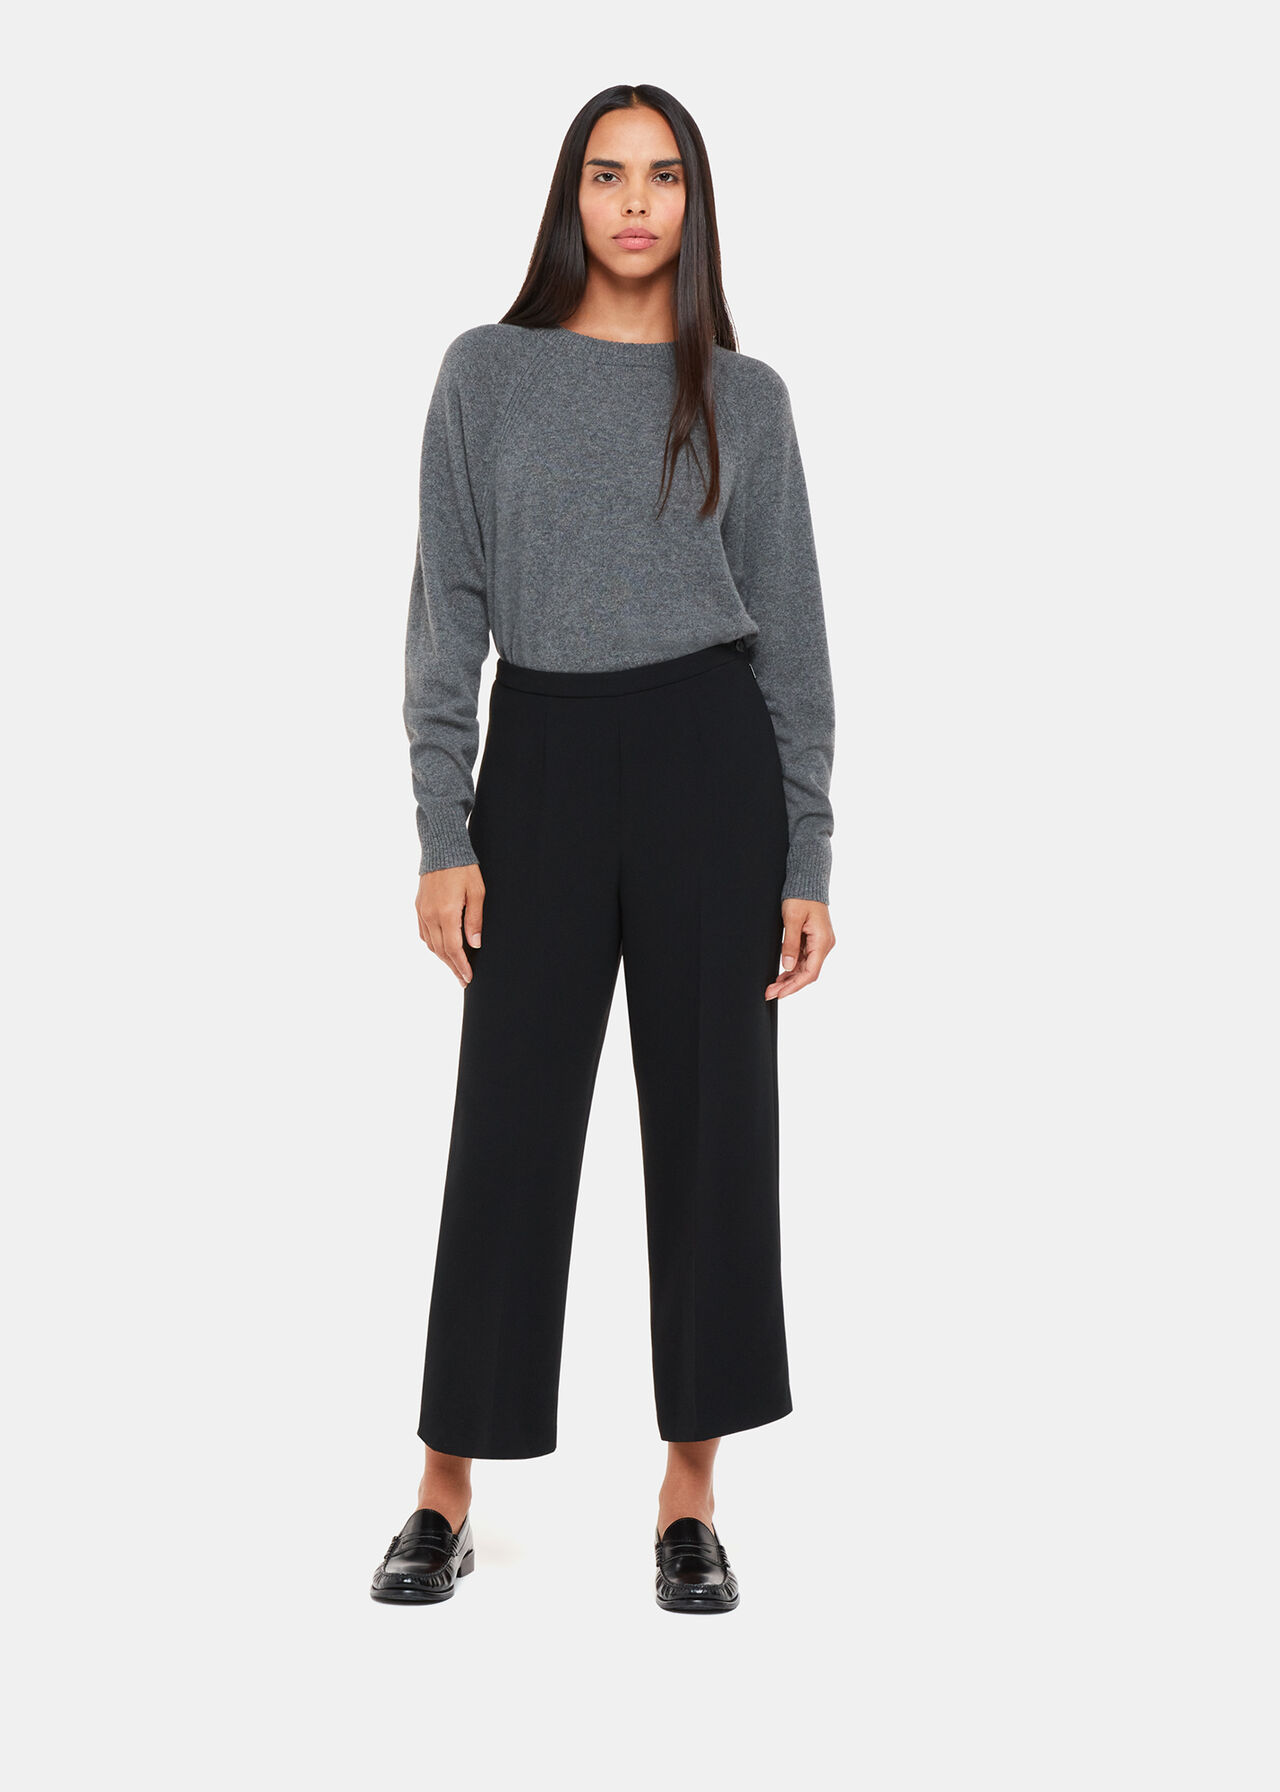 Buy Black Wide Leg Cropped Trousers 14, Trousers